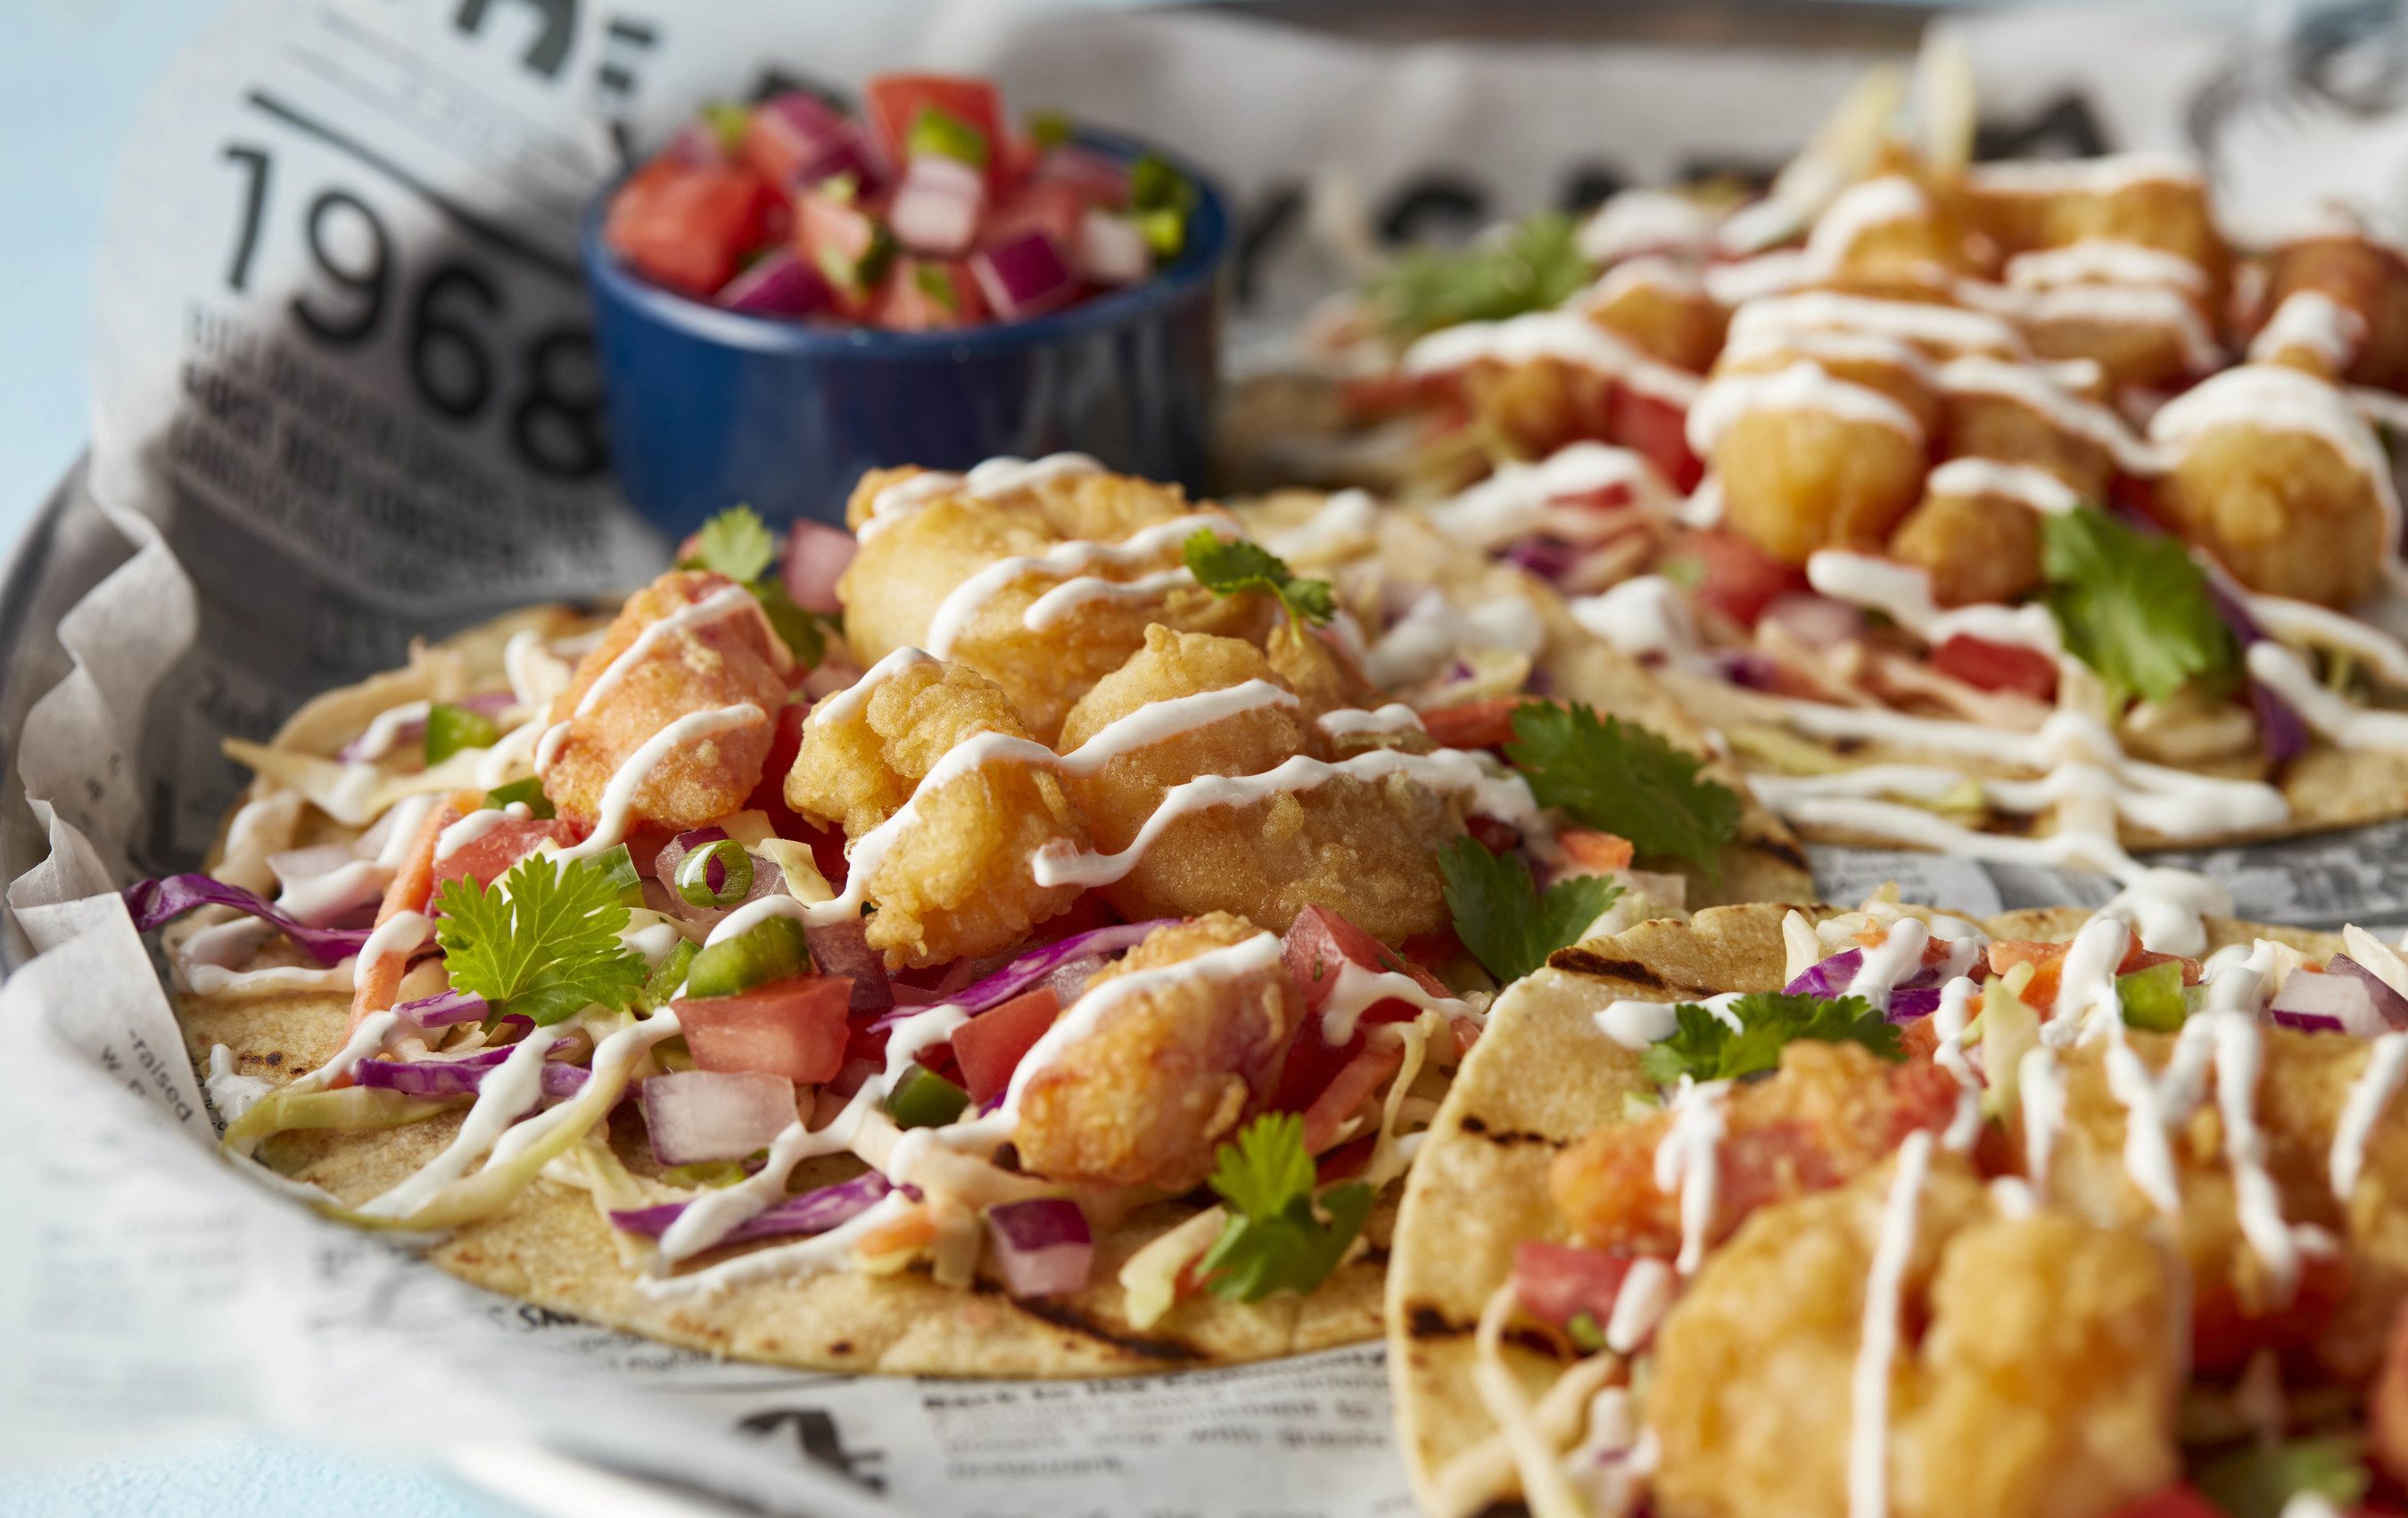 Lobsterfest Returns with New Dishes Including Lobster & Shrimp Tacos and the Maine Lobster Tail Duo at Red Lobster 